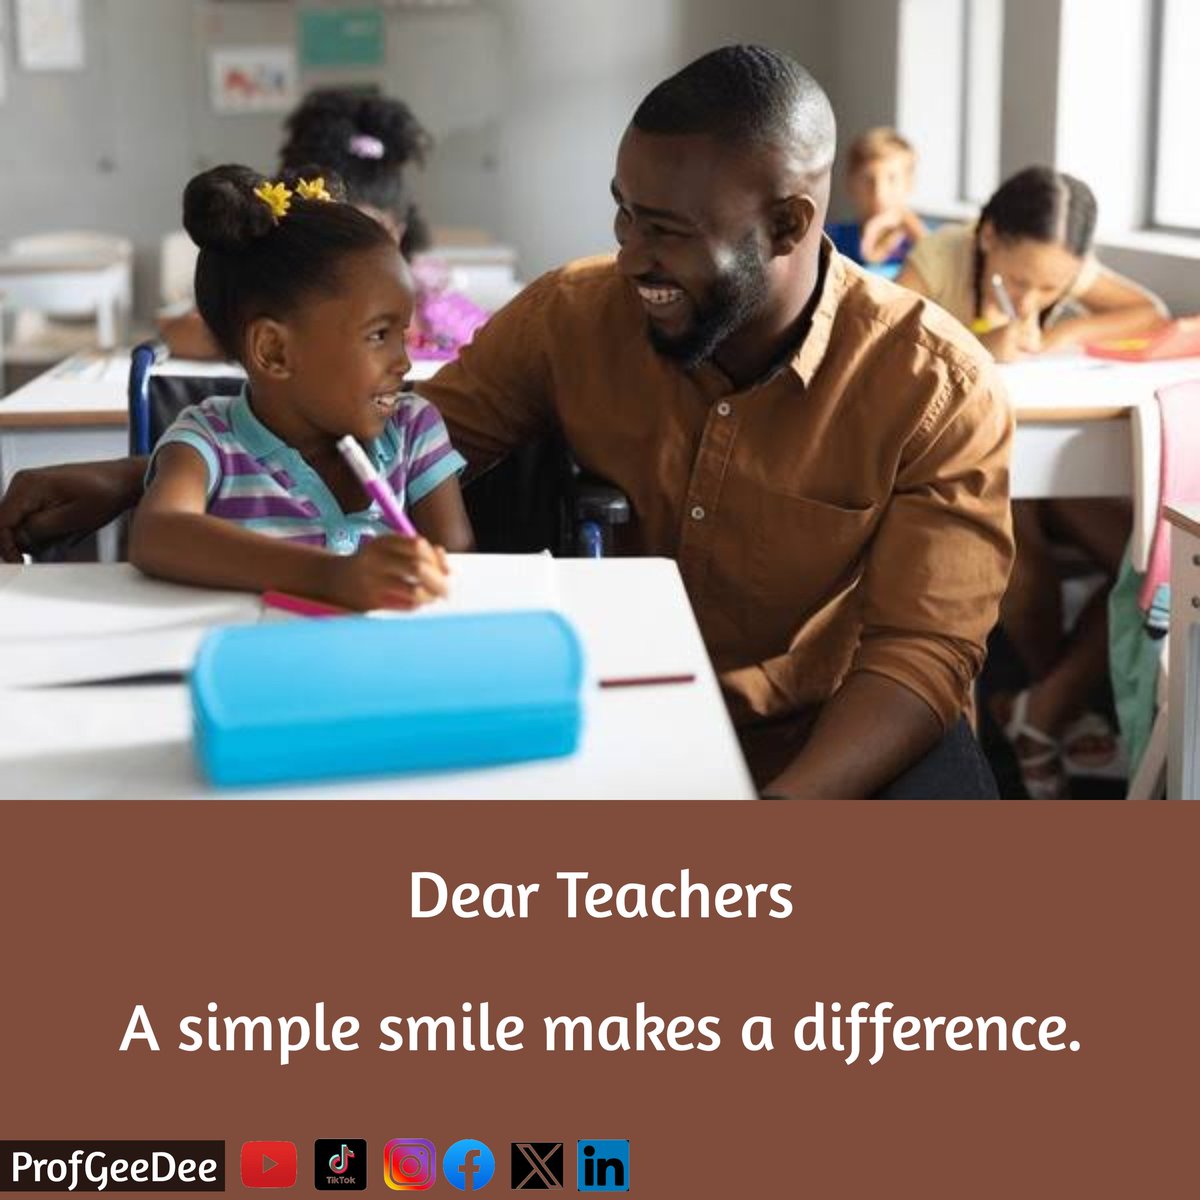 It is important to teach your preschoolers the power of sharing smiles.

You can use a rhyme to remind them that a simple smile can have a big impact on people around them.

#earlyyears
#earlylearning
#earlychildhoodeducation
#dearteacherseries
#profgeedee